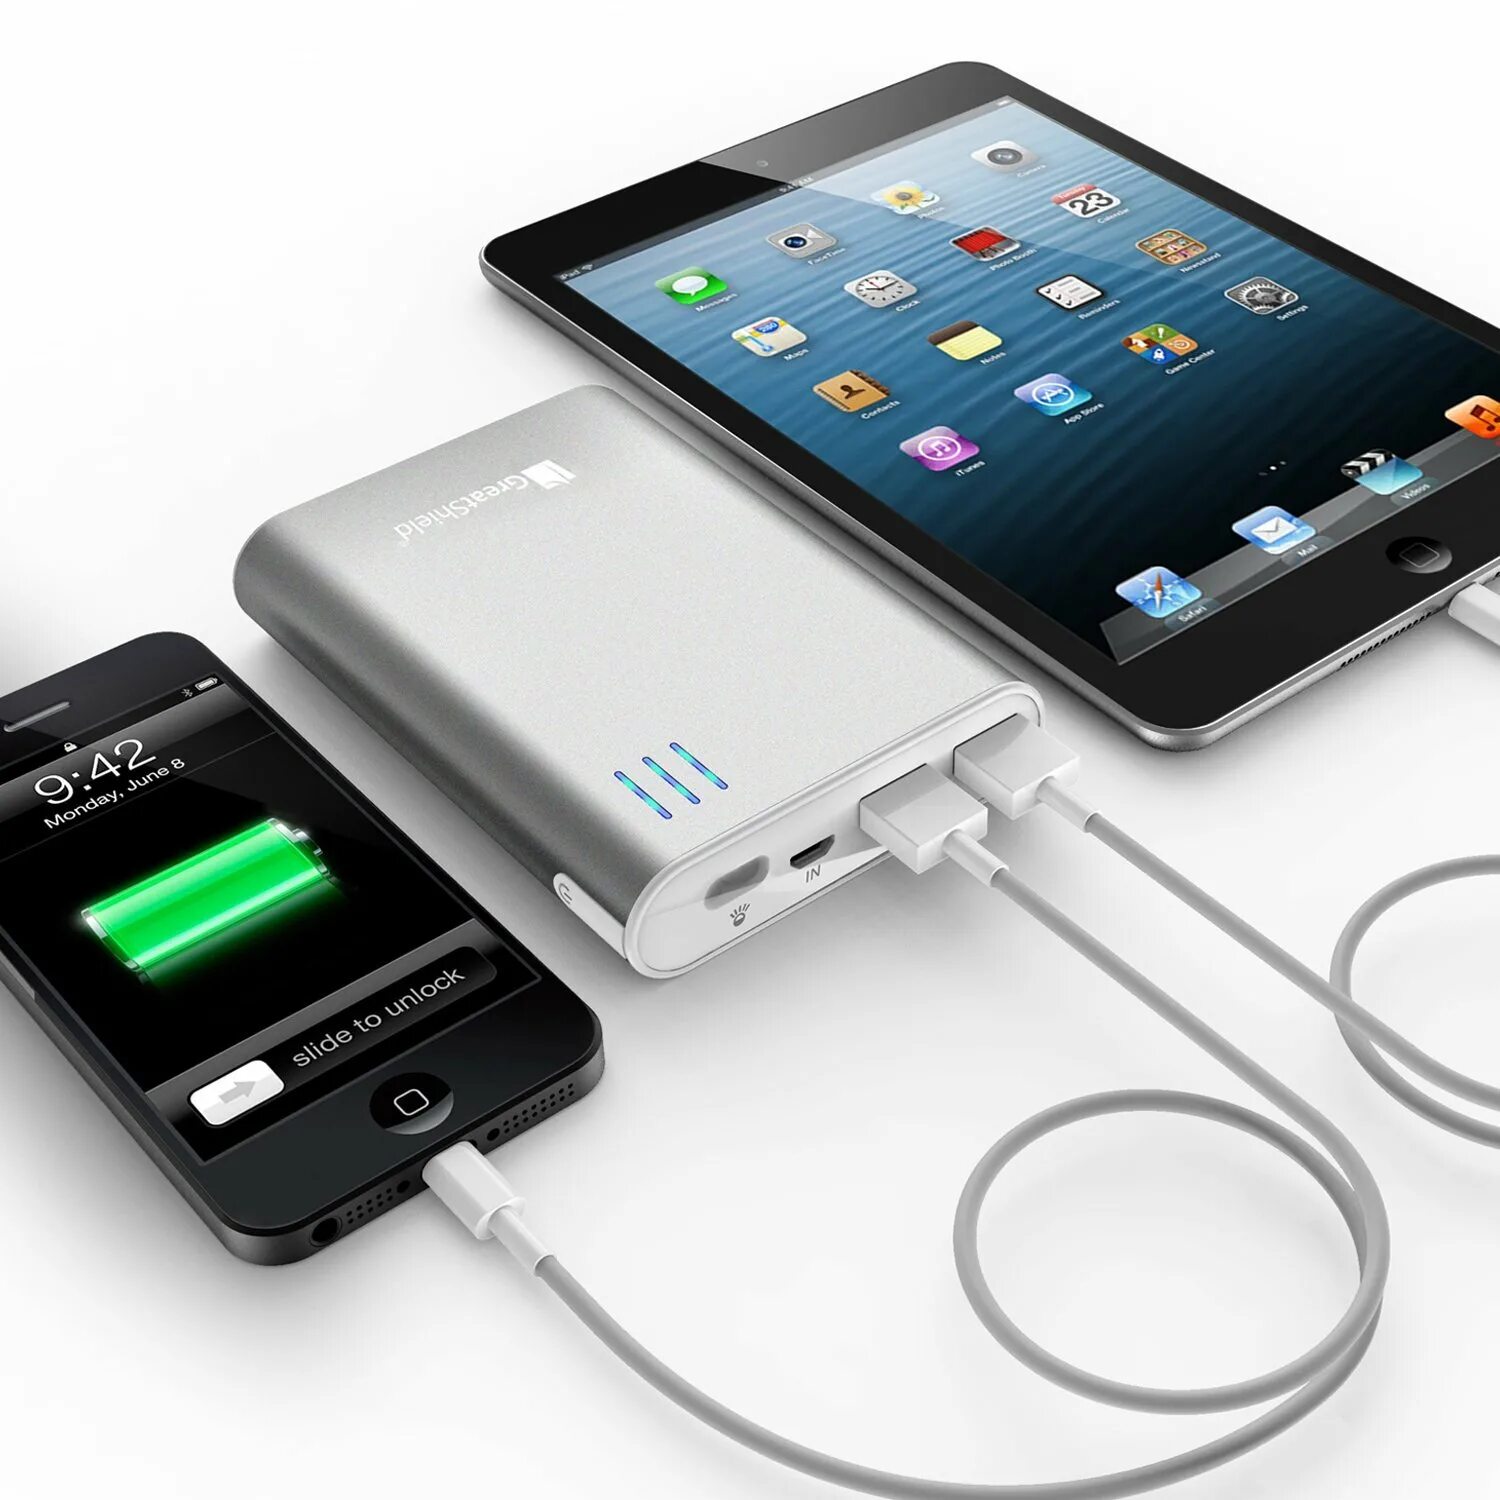 Charger mobile Power Bank. Battery Charger Power Bank. Portable Power Bank. Smart mobile пауэрбанк.